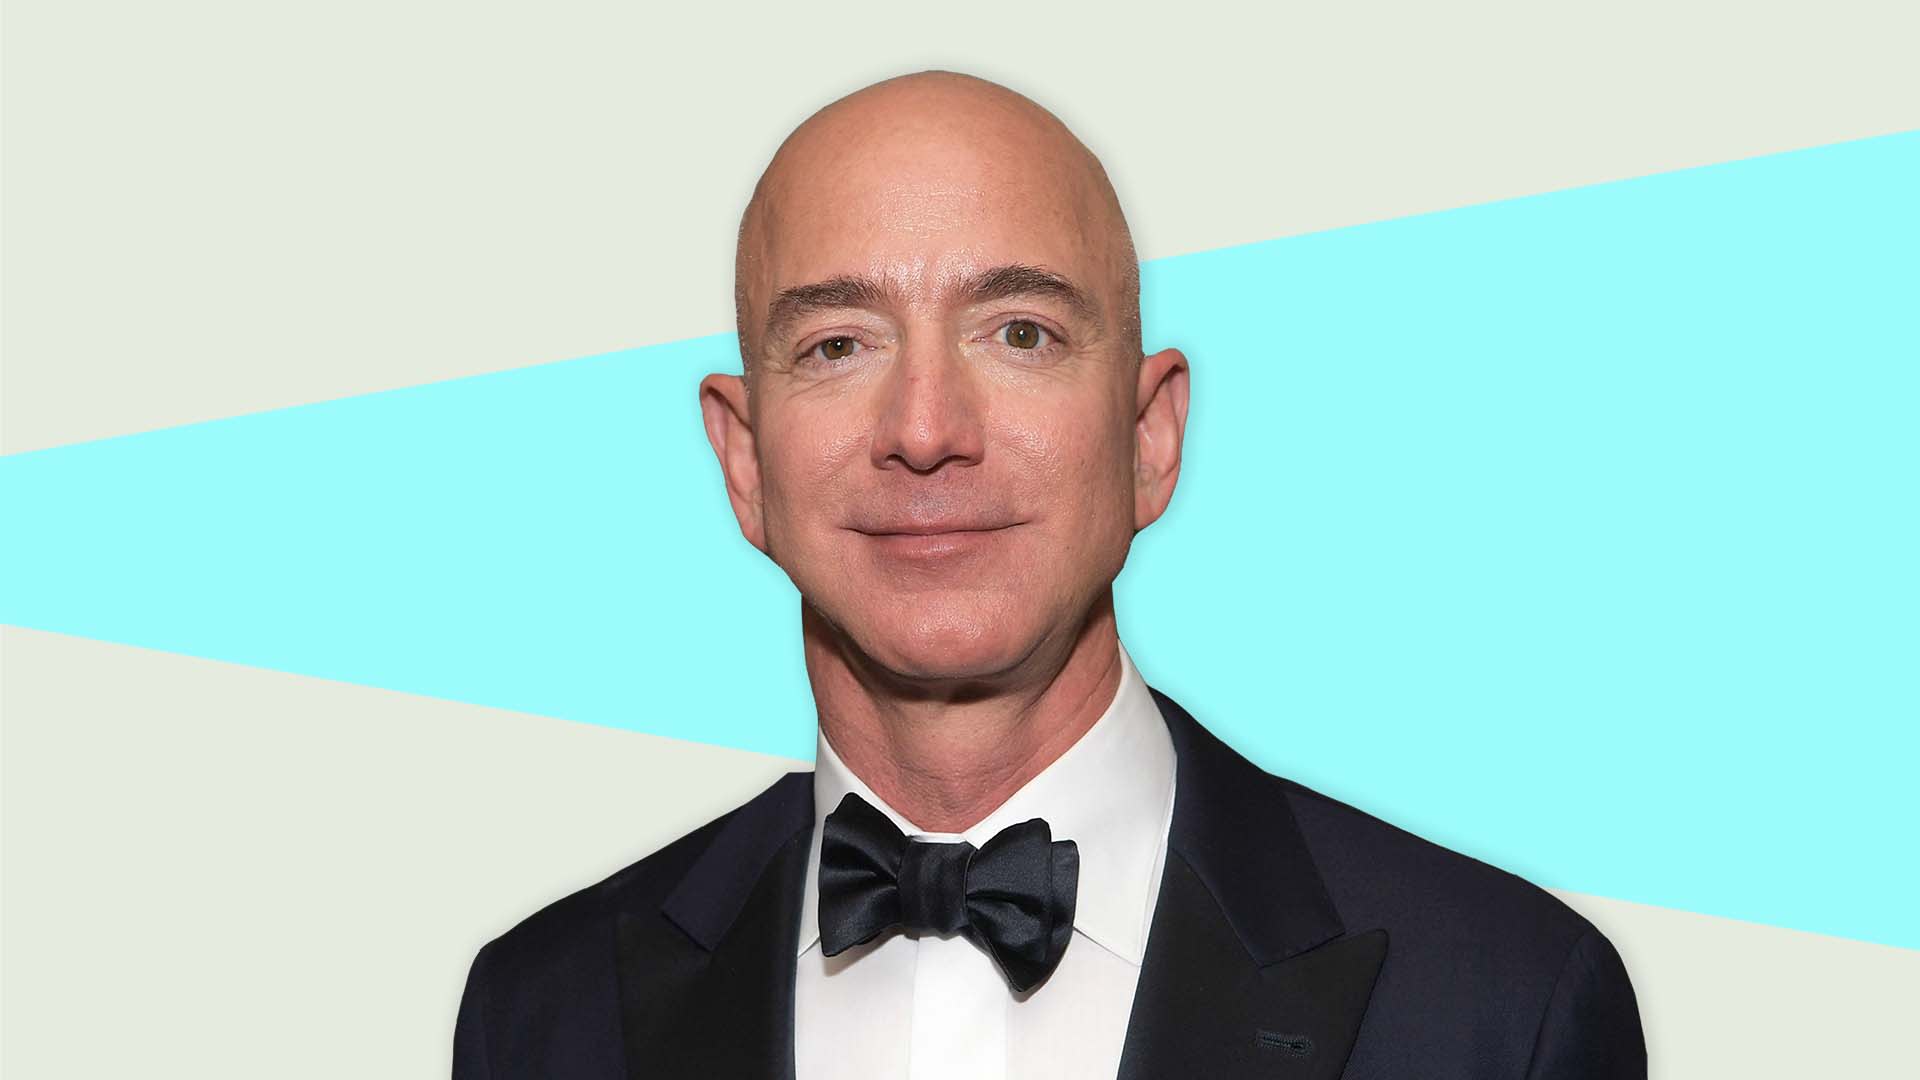 How Jeff Bezos Used the Golden Question to Leave a Great Job and Build Amazon